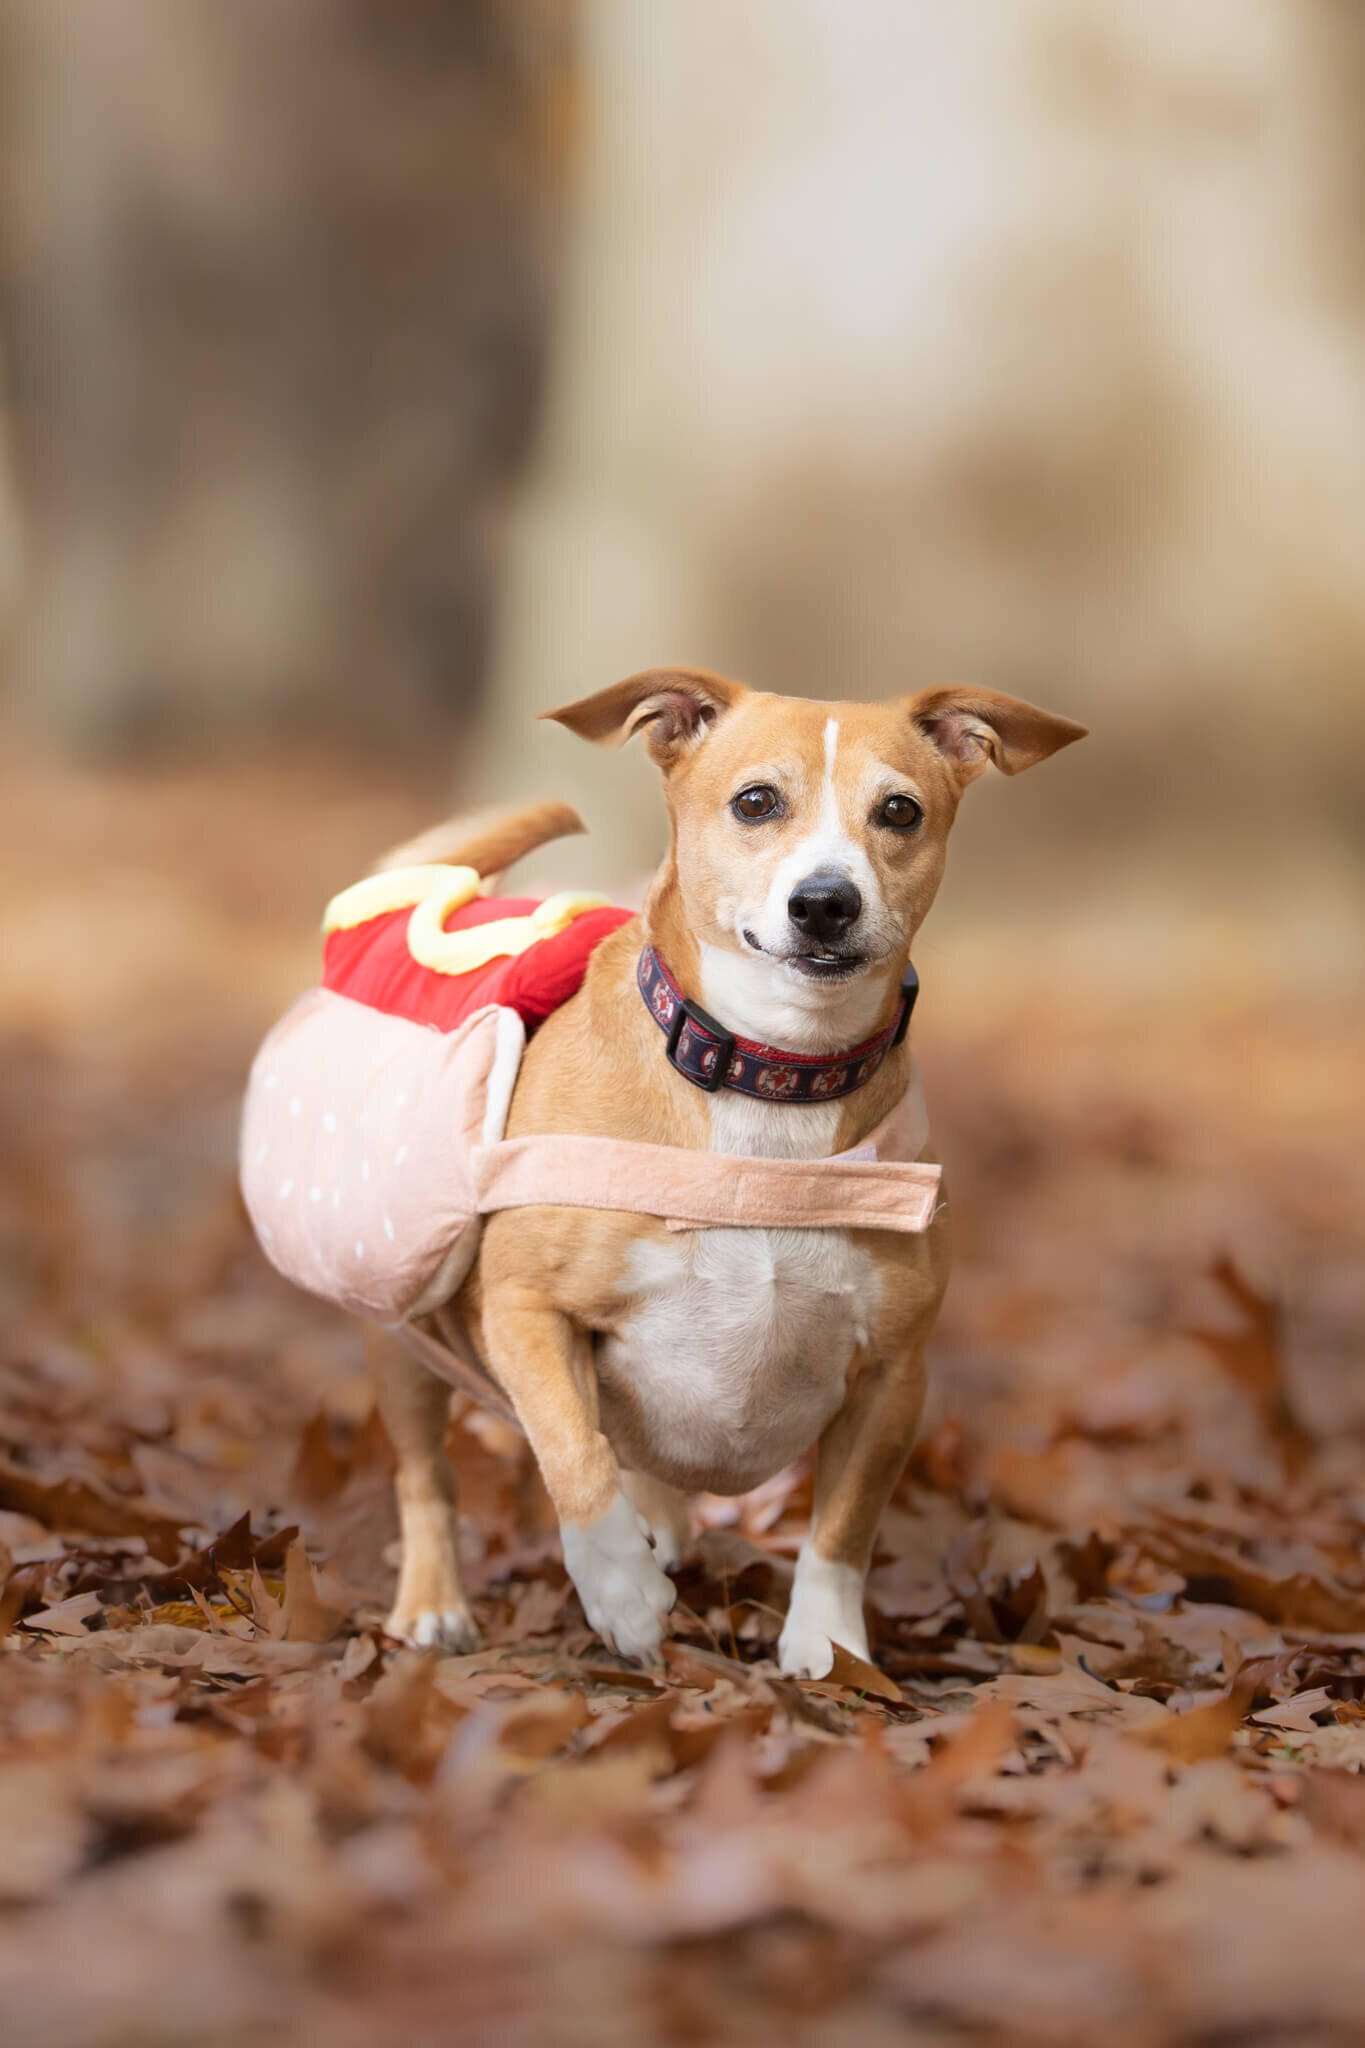 Tan and white mixed breed rescue pup in hotdog costume